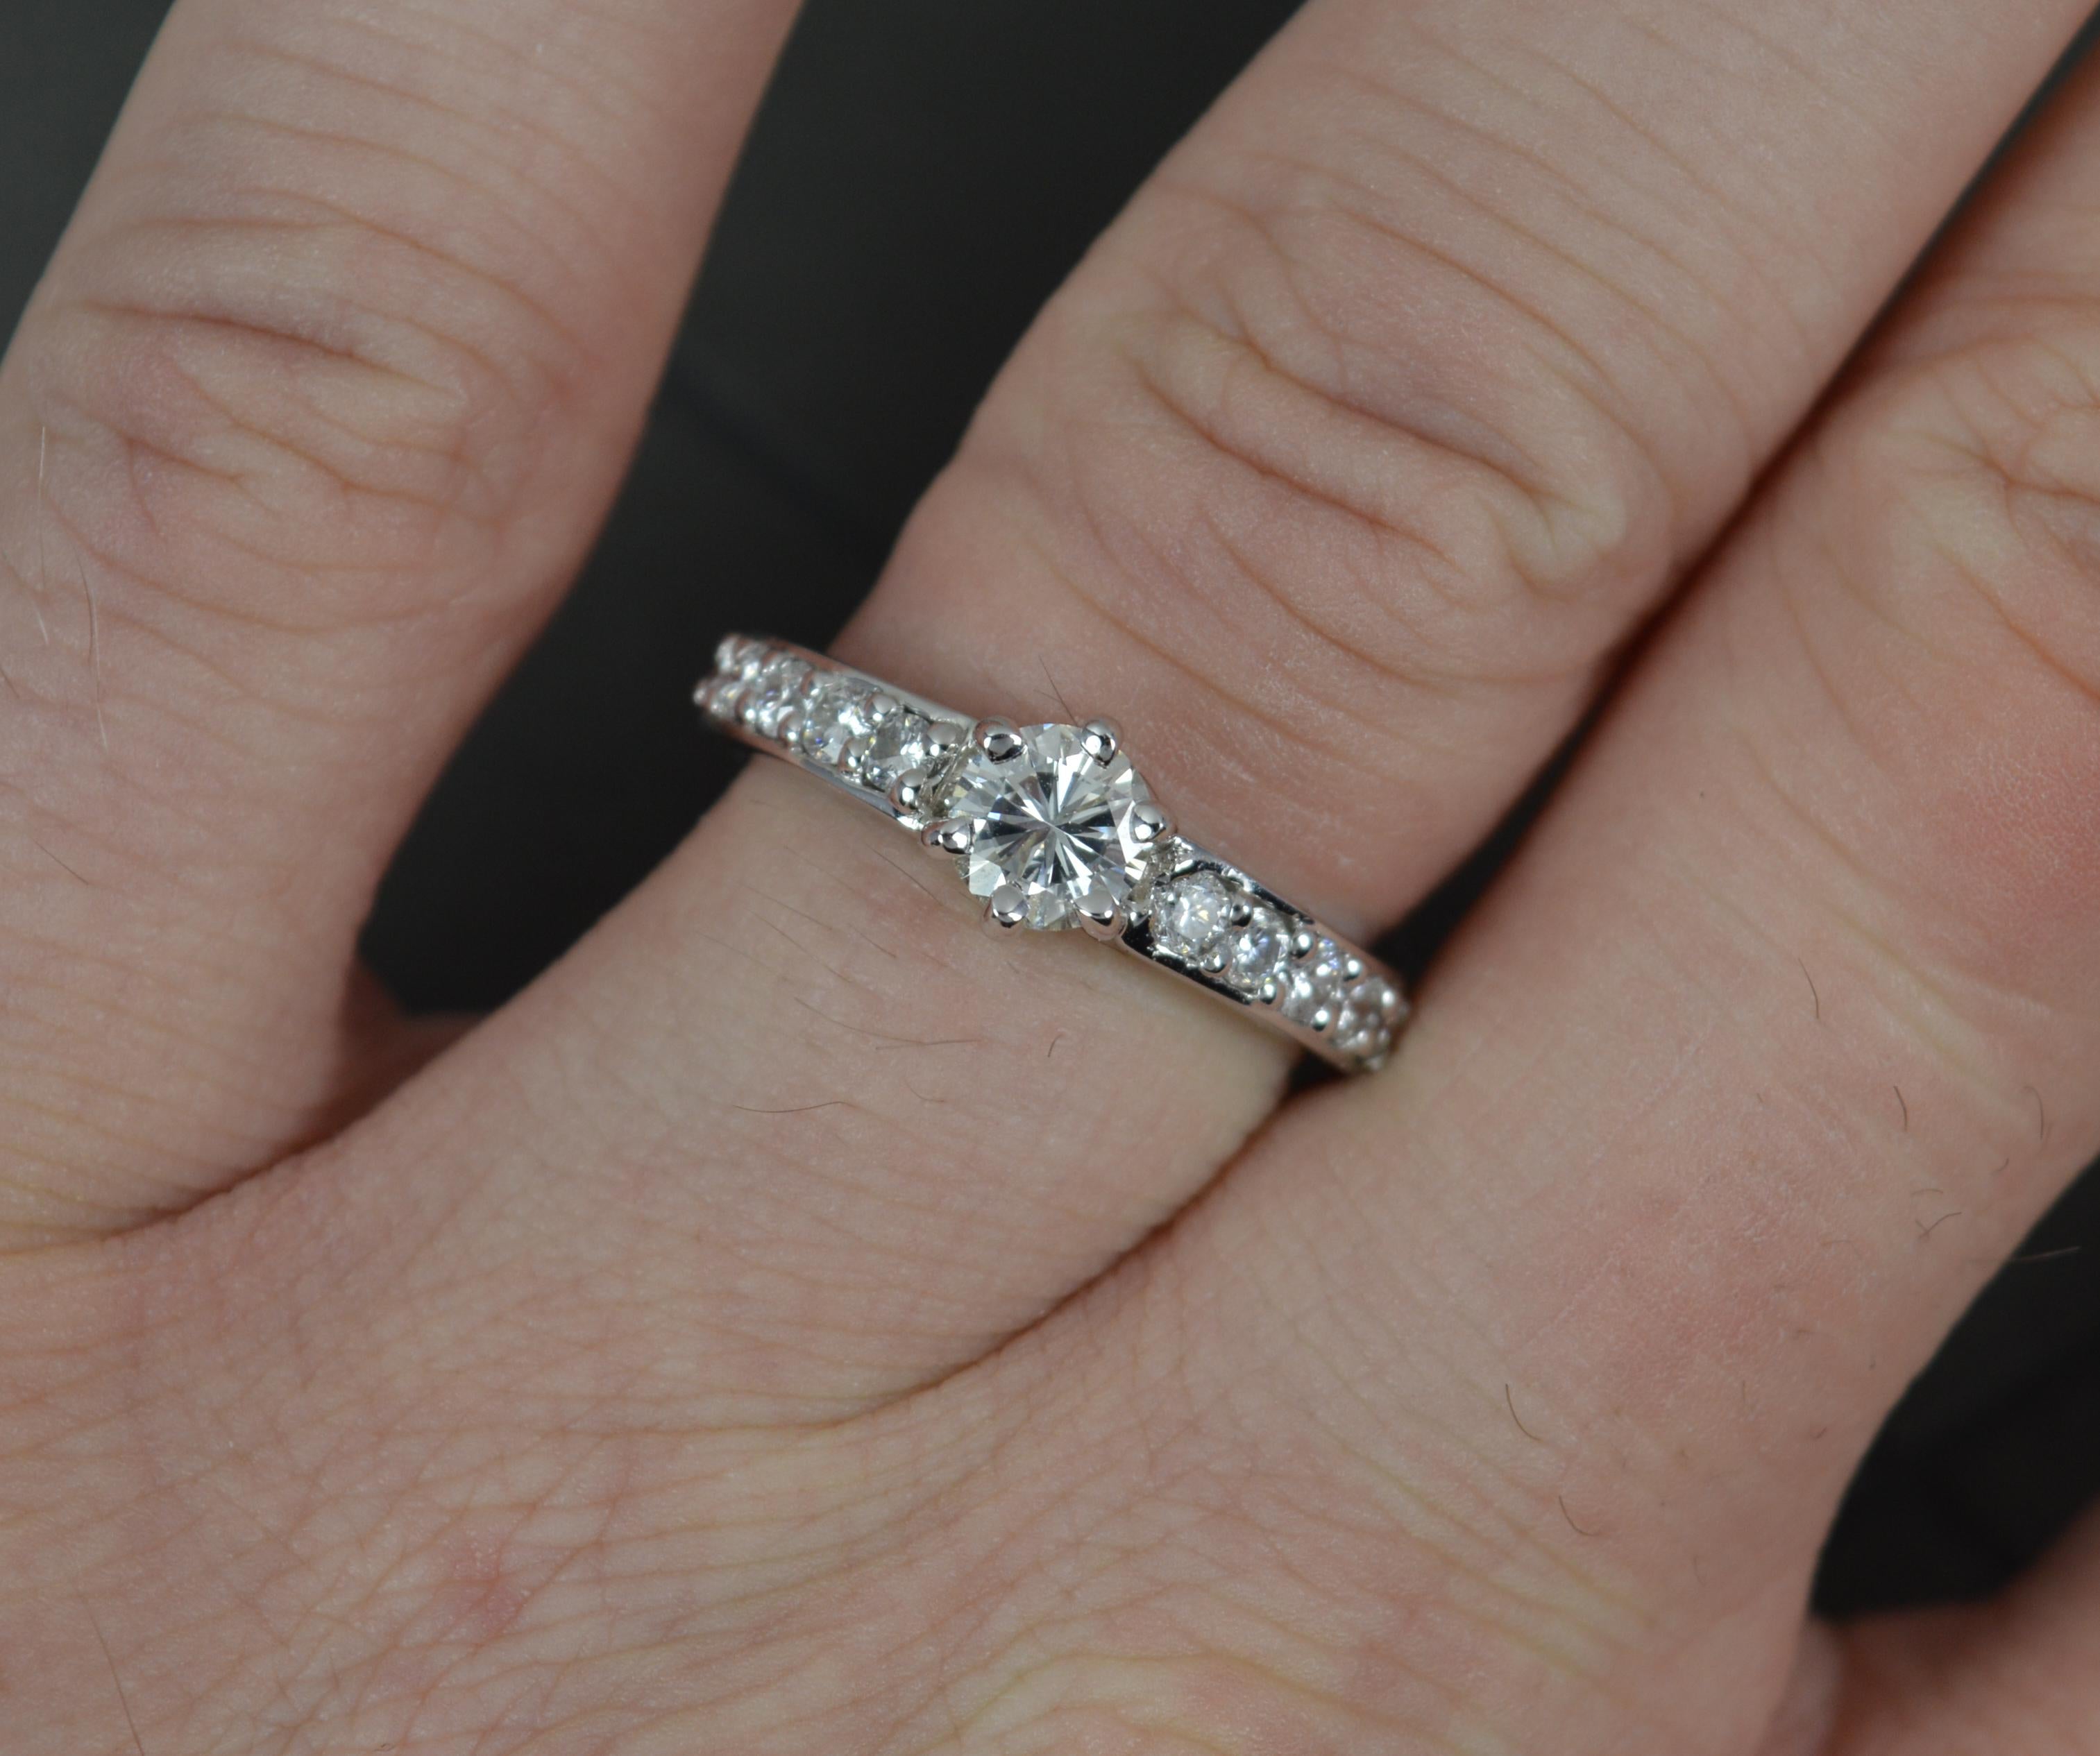 A wonderful diamond engagement ring.
Solid 18 carat white gold shank and six claw setting.
Designed with a single round brilliant cut diamond to centre, 0.5cts. Set with an additional five round brilliant cut diamonds to each shoulder. 0.90 carat